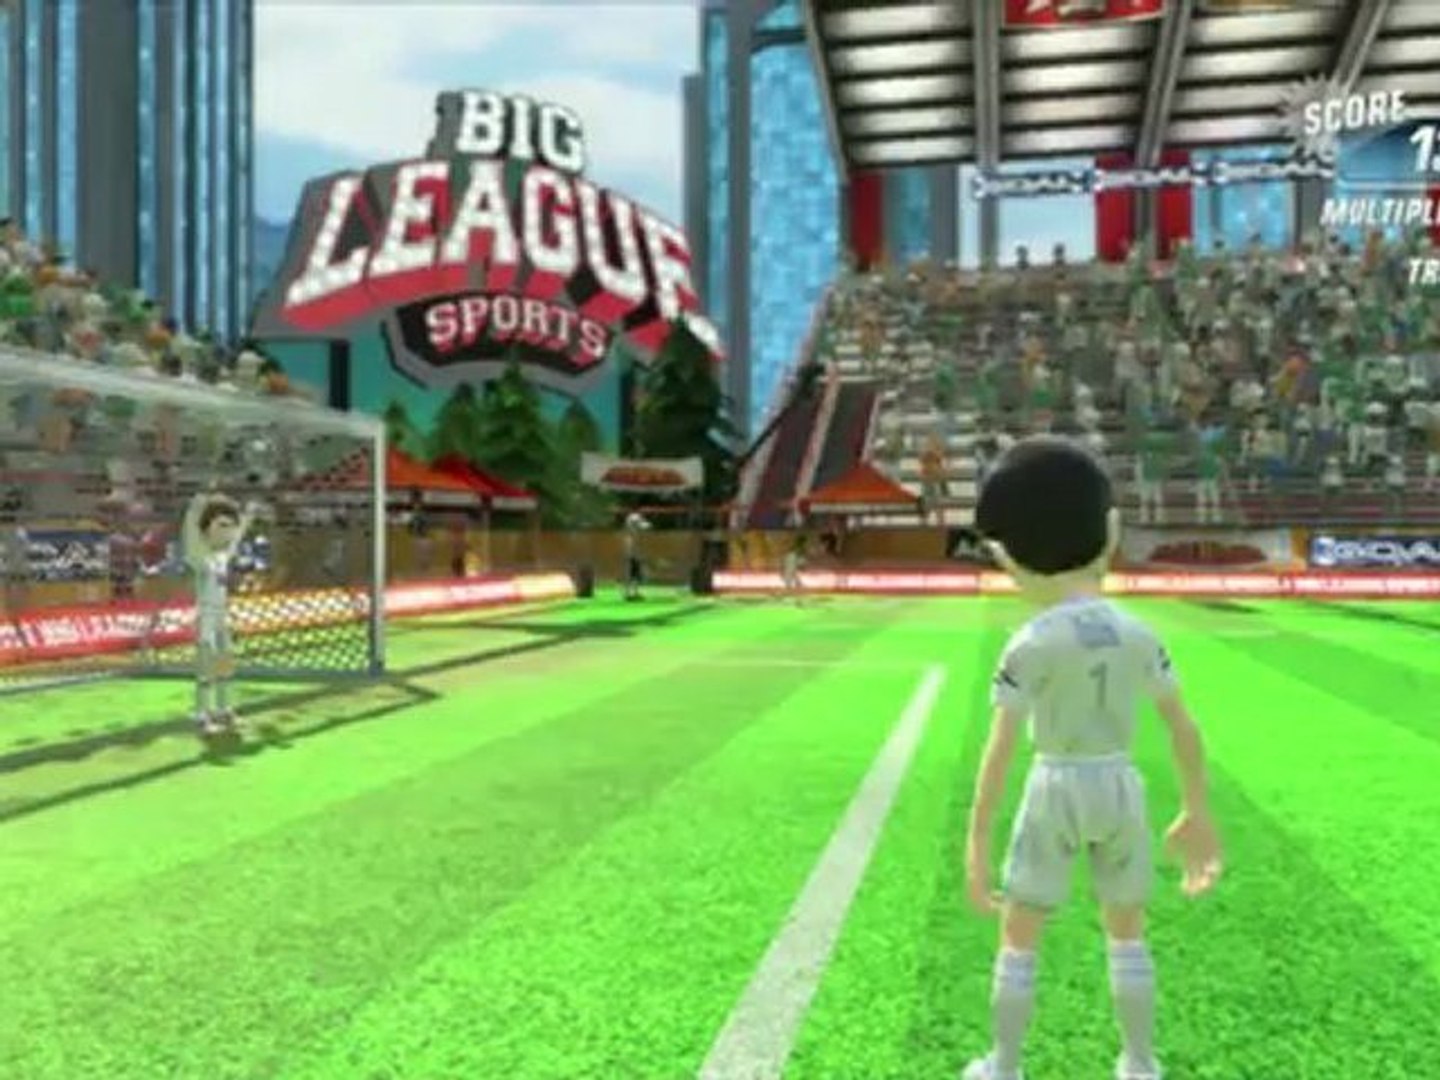 CGRundertow BIG LEAGUE SPORTS for Xbox 360 Video Game Review - video  Dailymotion